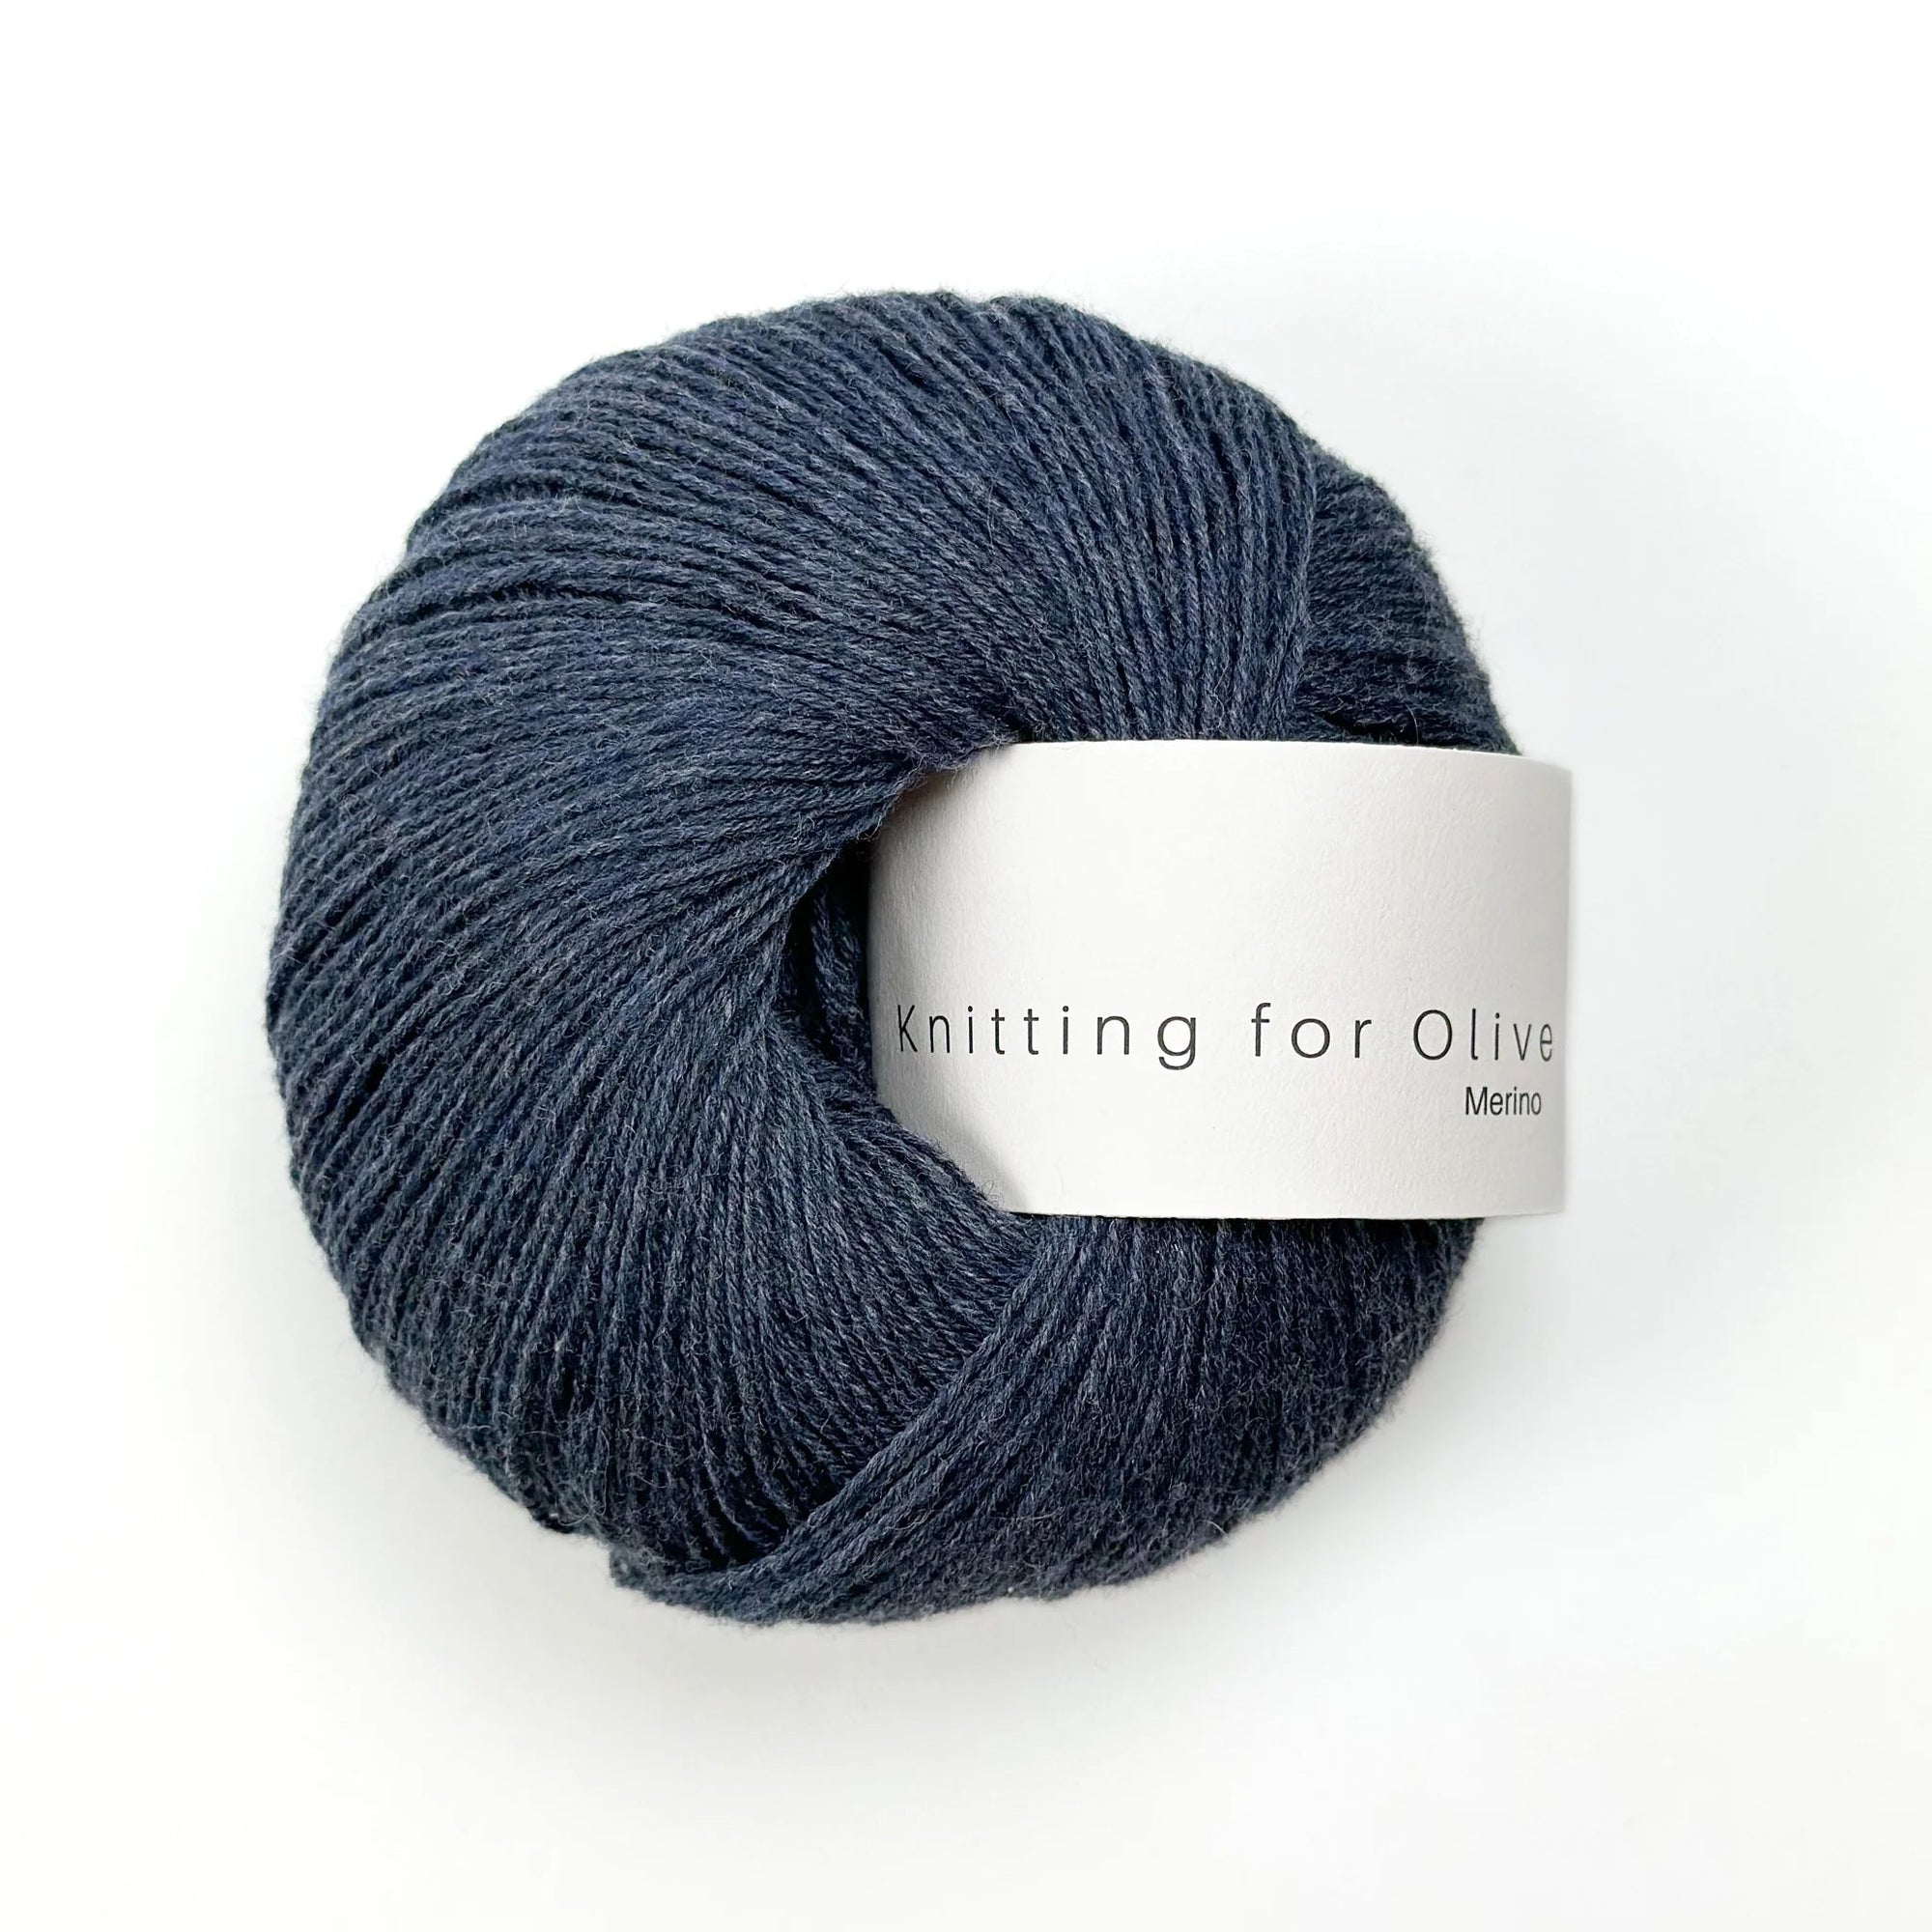 Knitting for Olive Merino - Knitting for Olive - Blue Whale - The Little Yarn Store